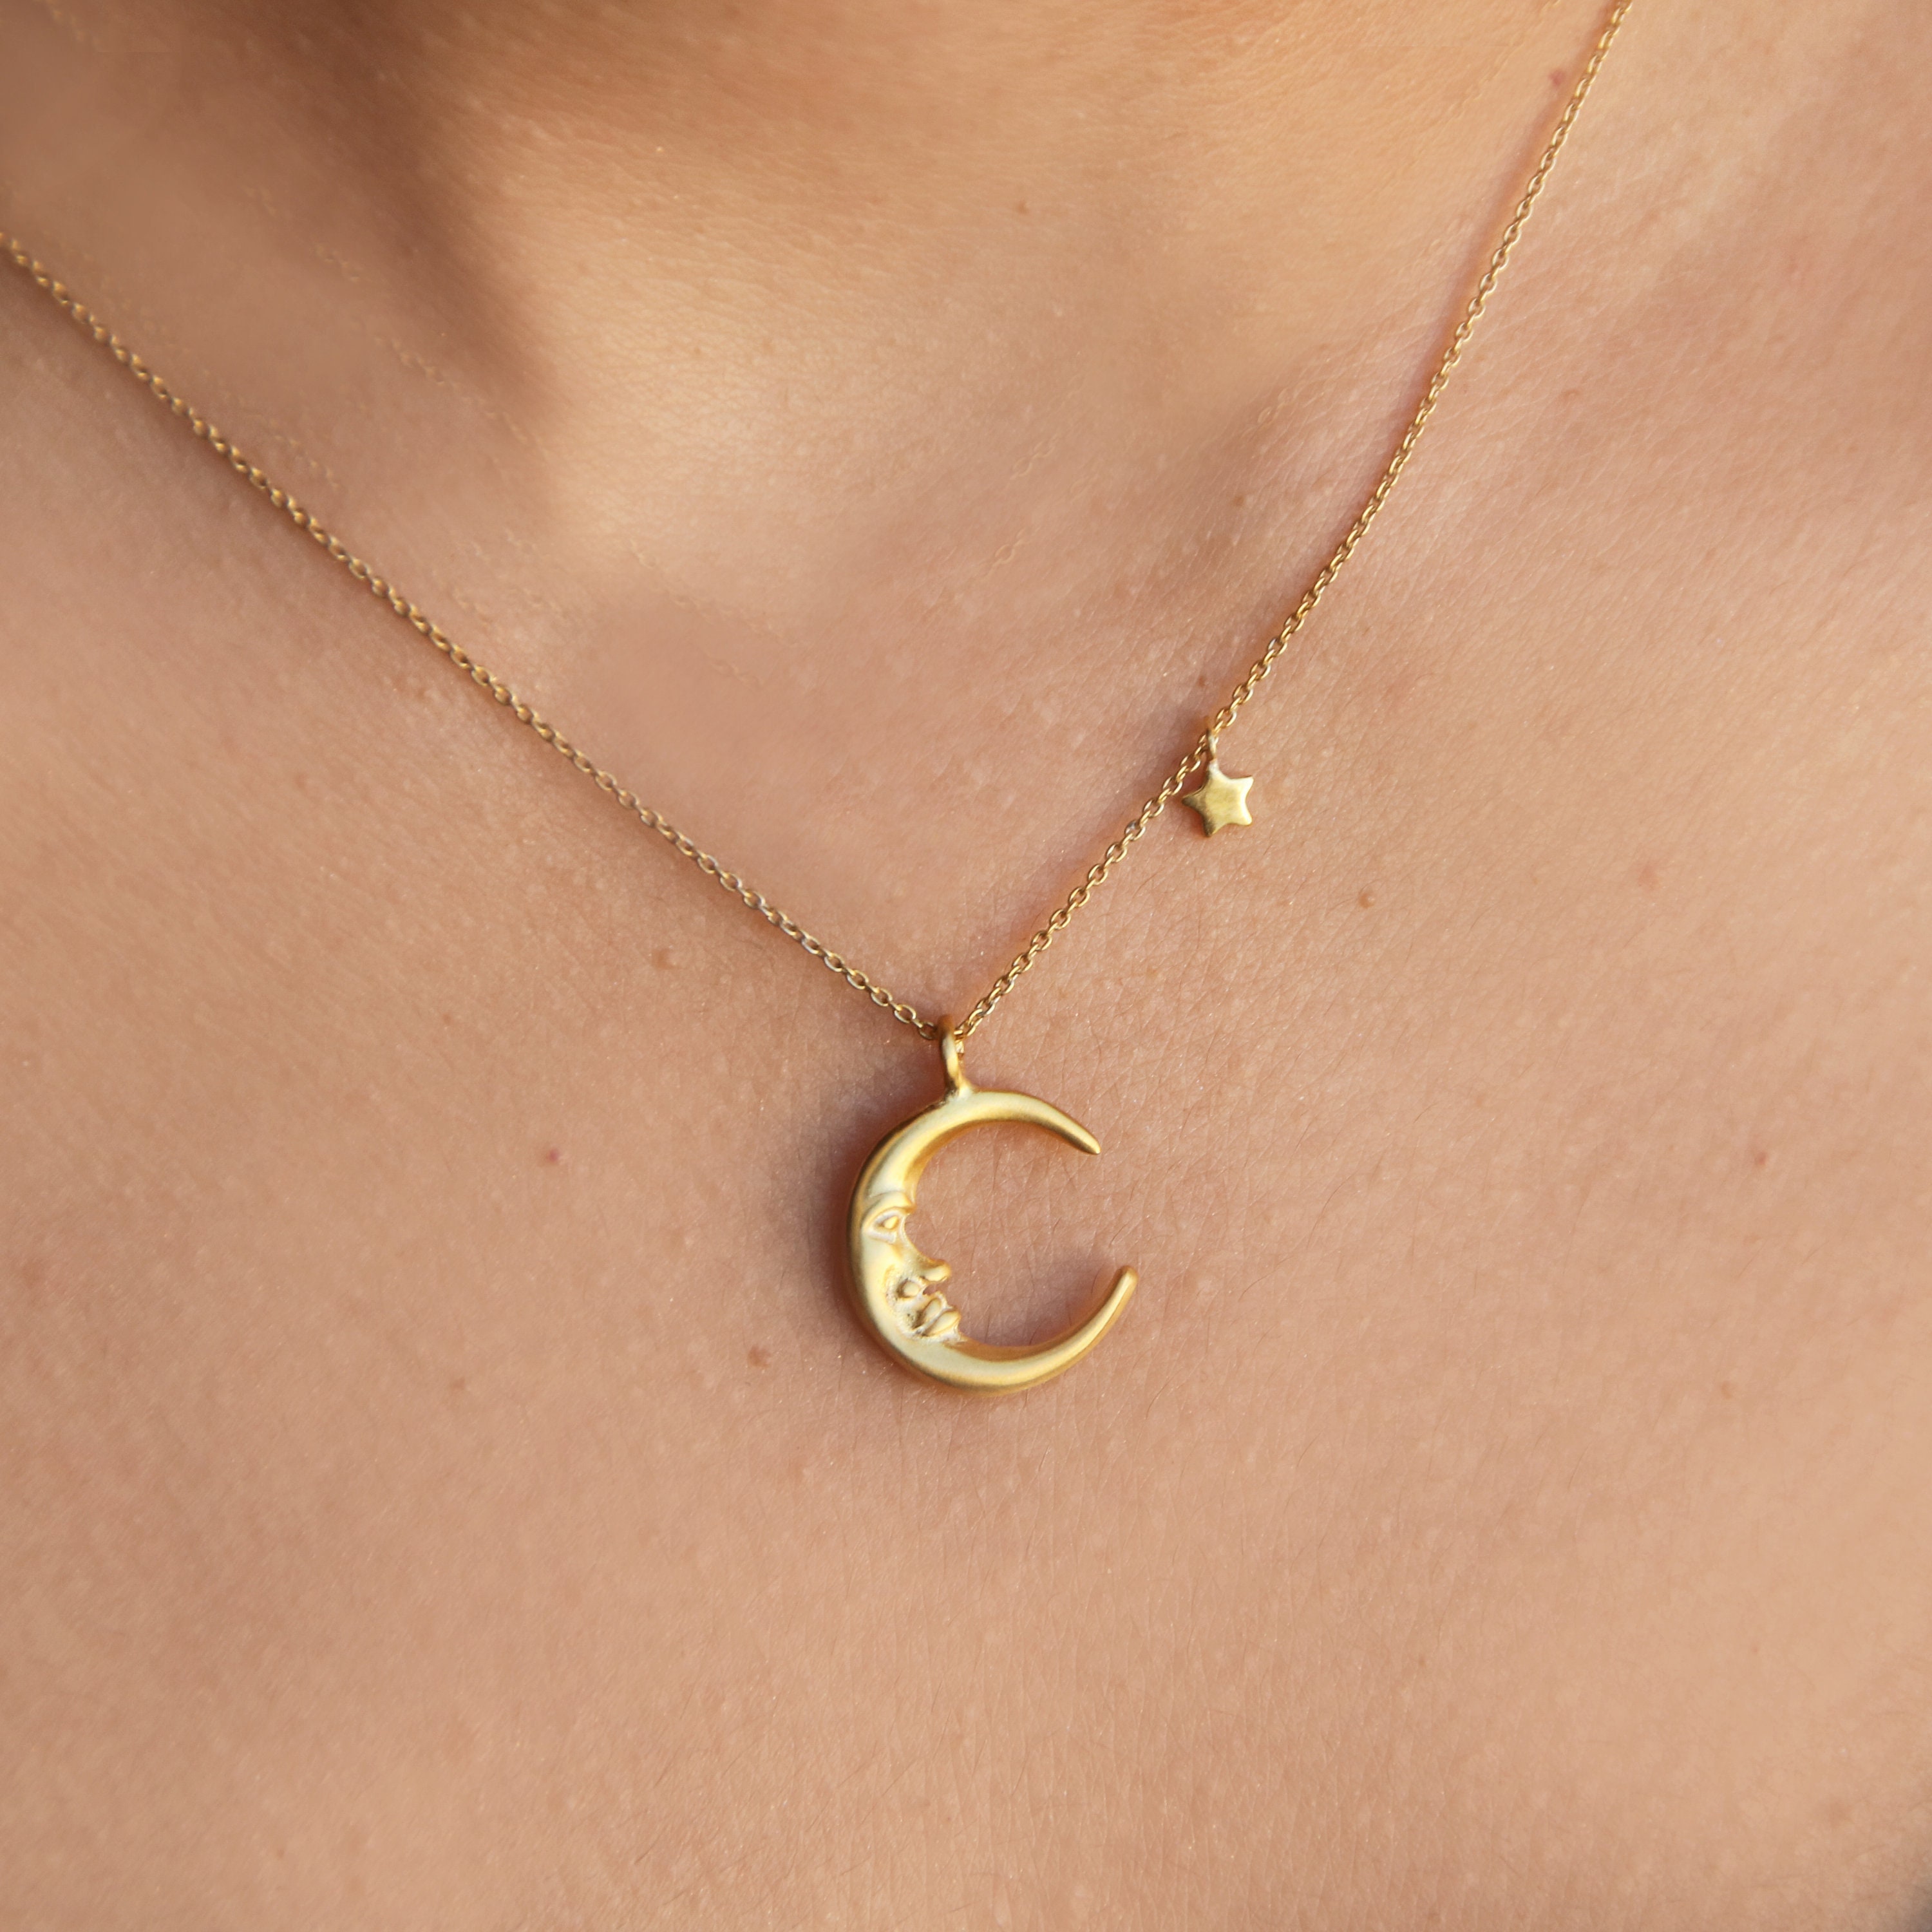 Crescent Moon Necklace, Half With Tiny Star Pendant, Delicate Celestial Necklace